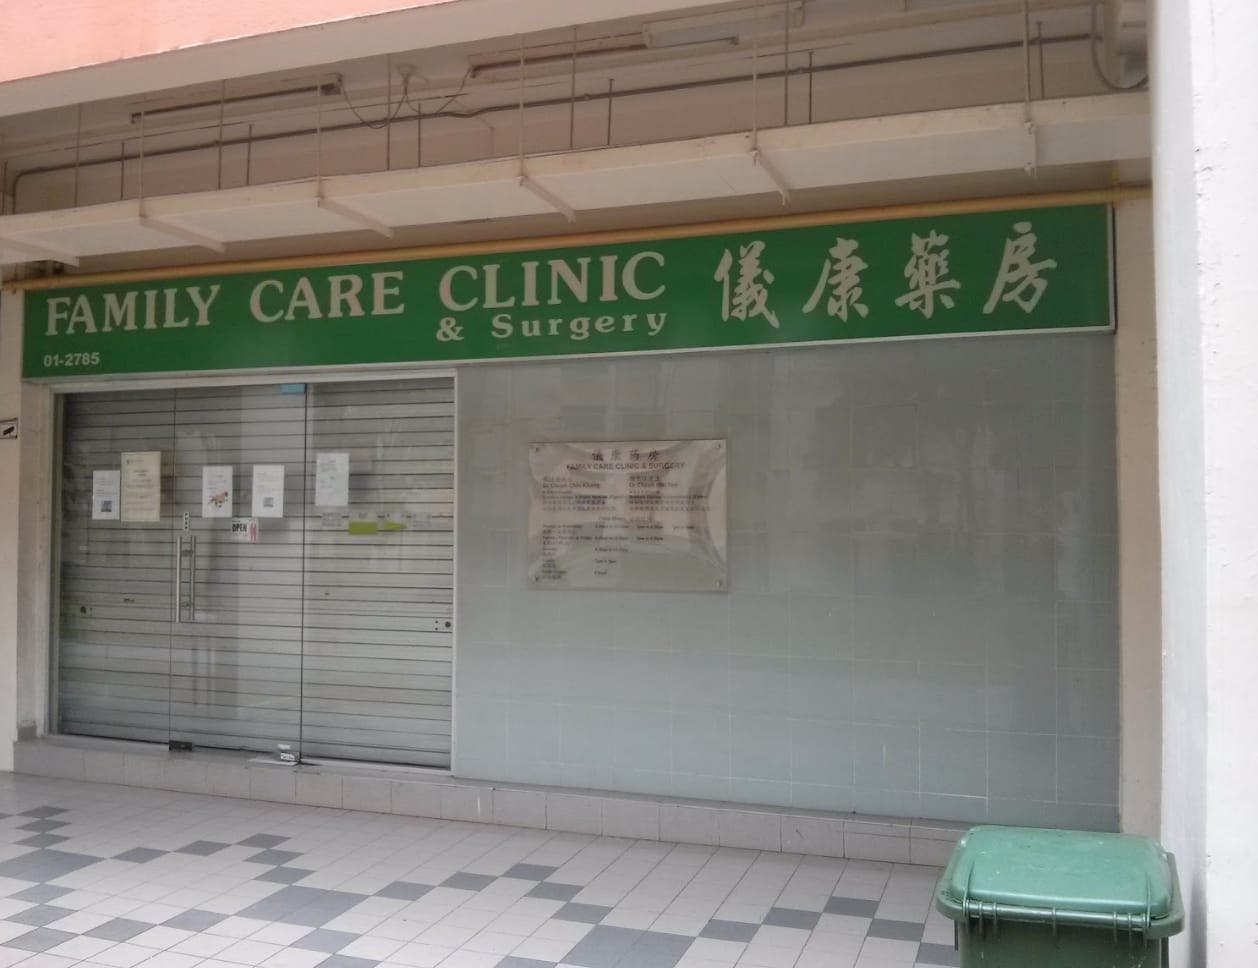 Family Care Clinic & Surgery